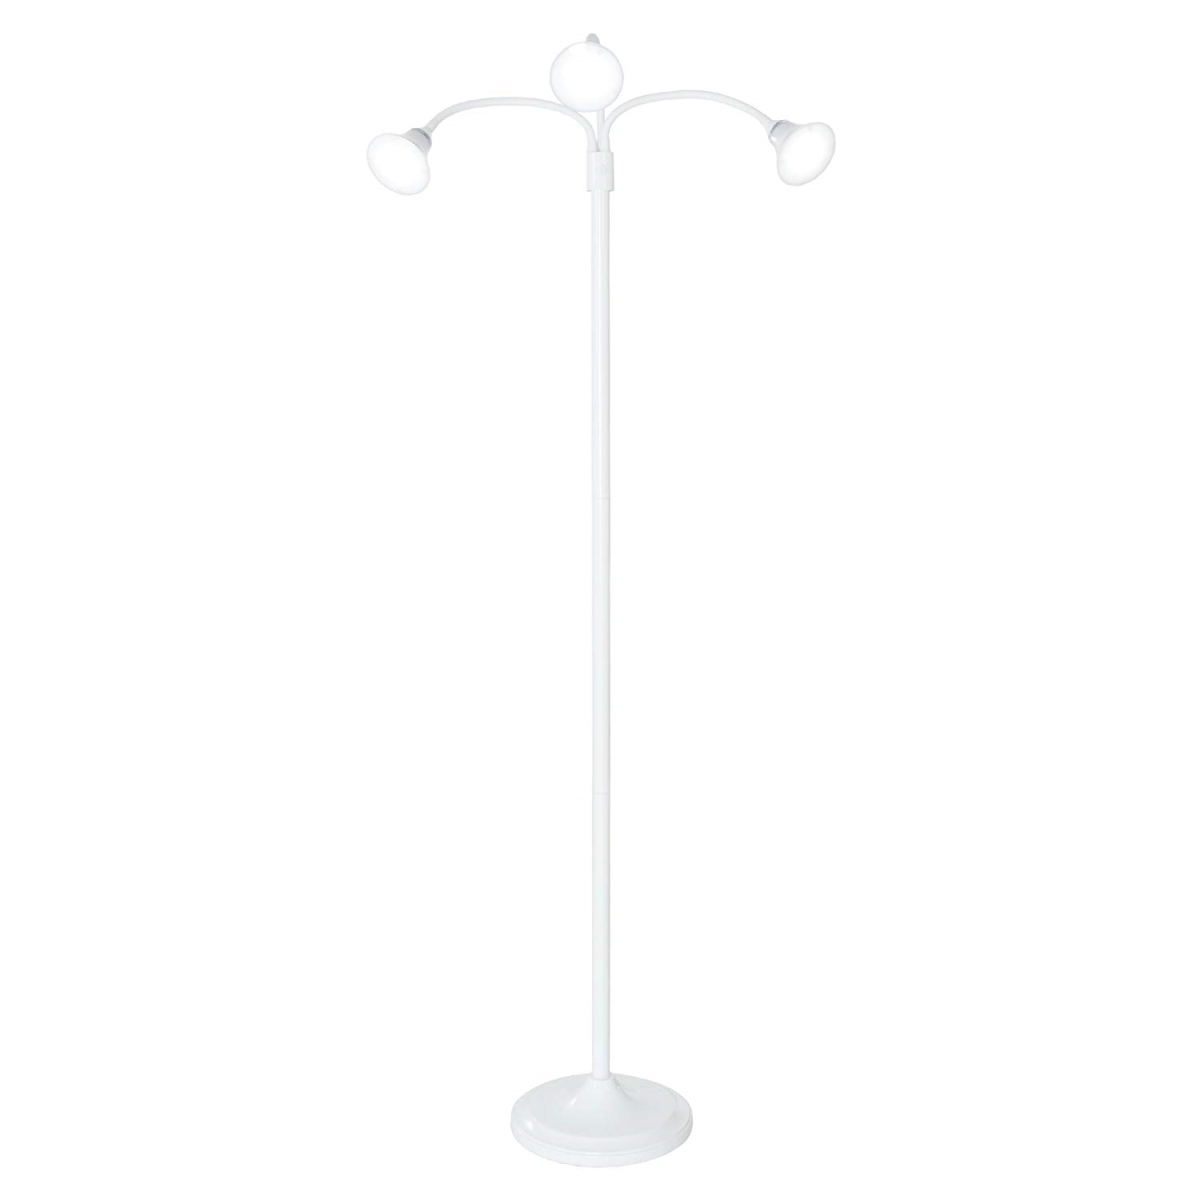 Lavish Home 72-4001w 3 Head Floor Lamp With Adjustable Arms, White